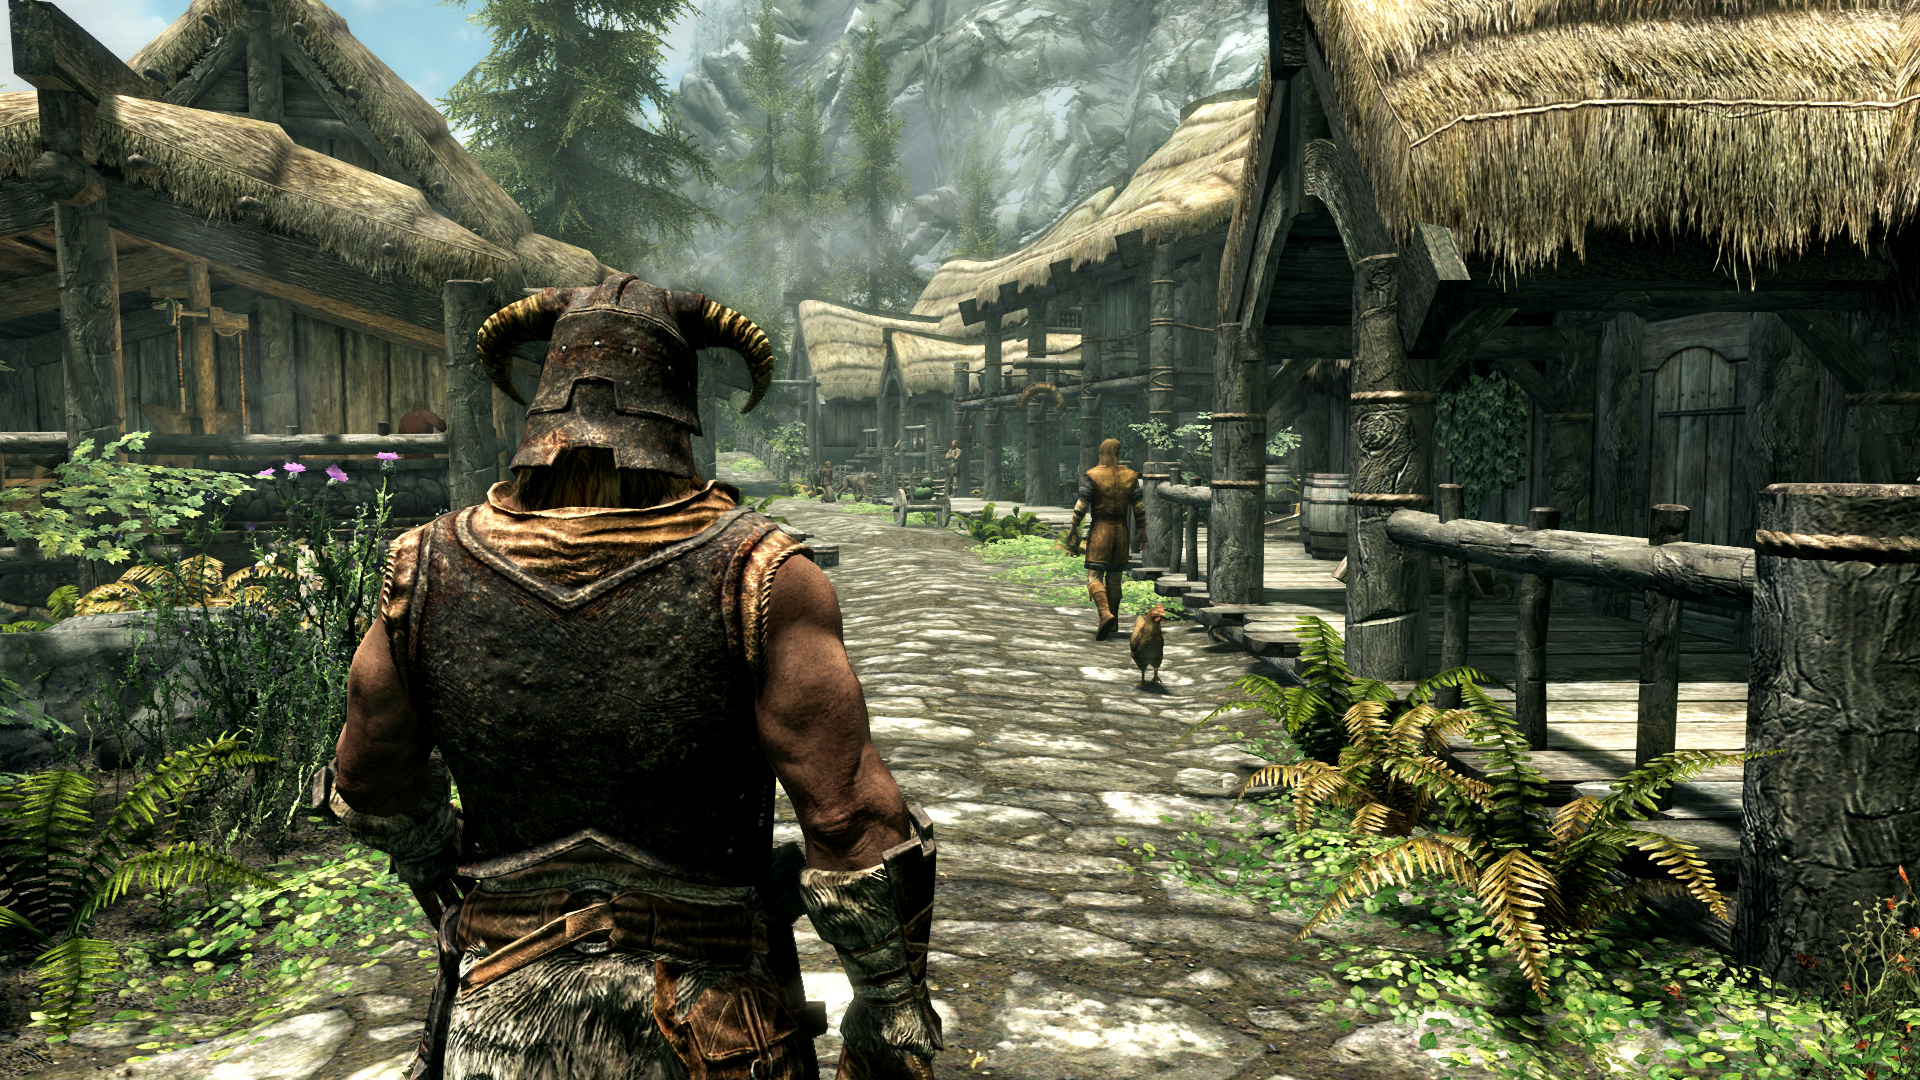 Skyrim - A huge world brought to life through NPCs in a huge world.